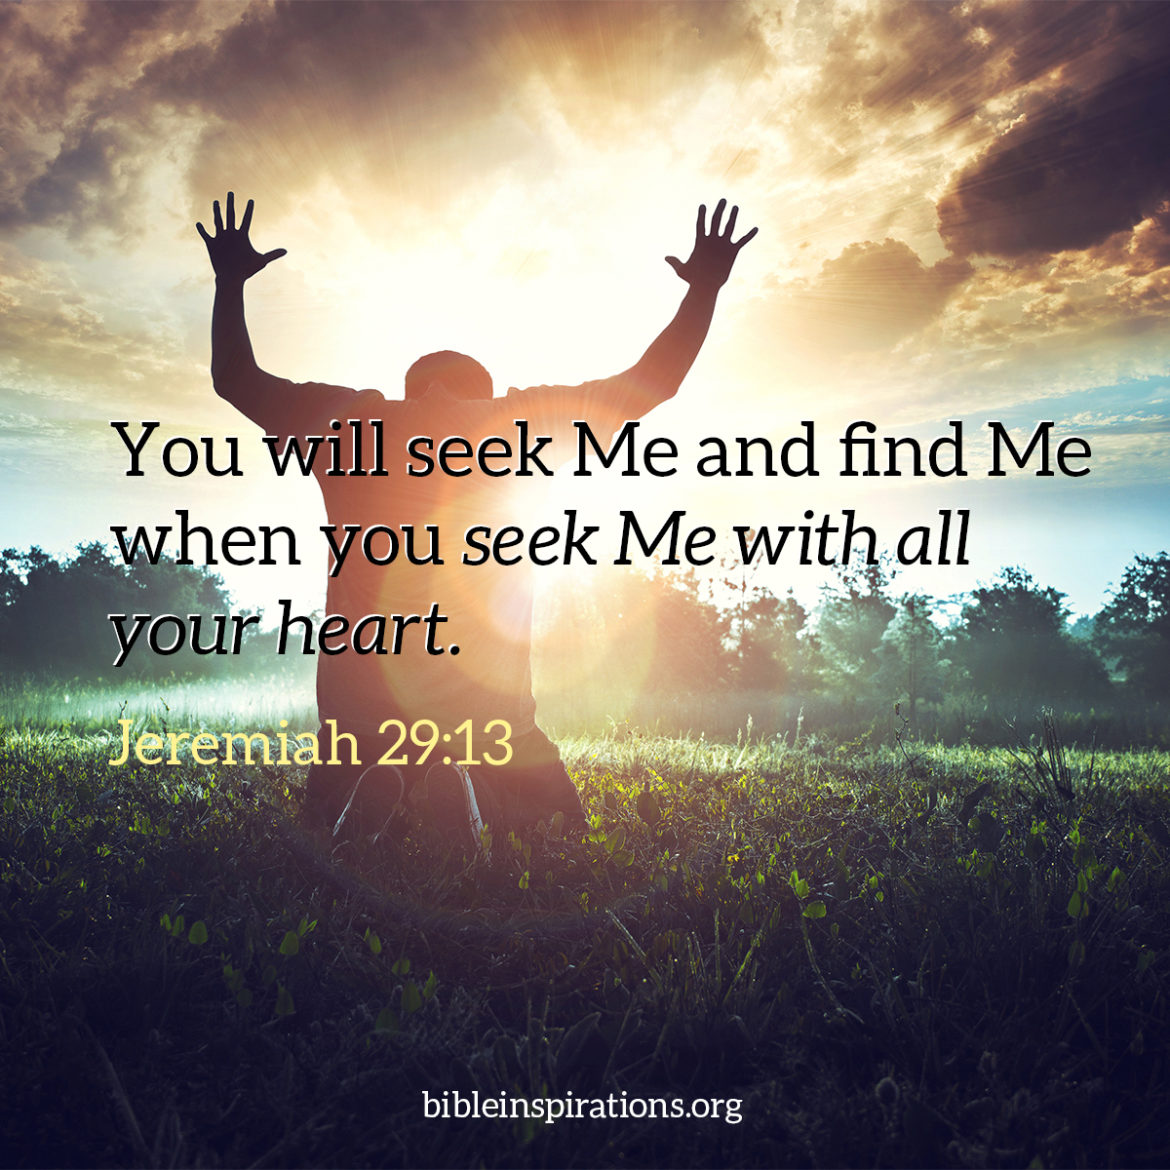 jeremiah-29-13 You will seek Me and find Me when you seek Me with all your heart.